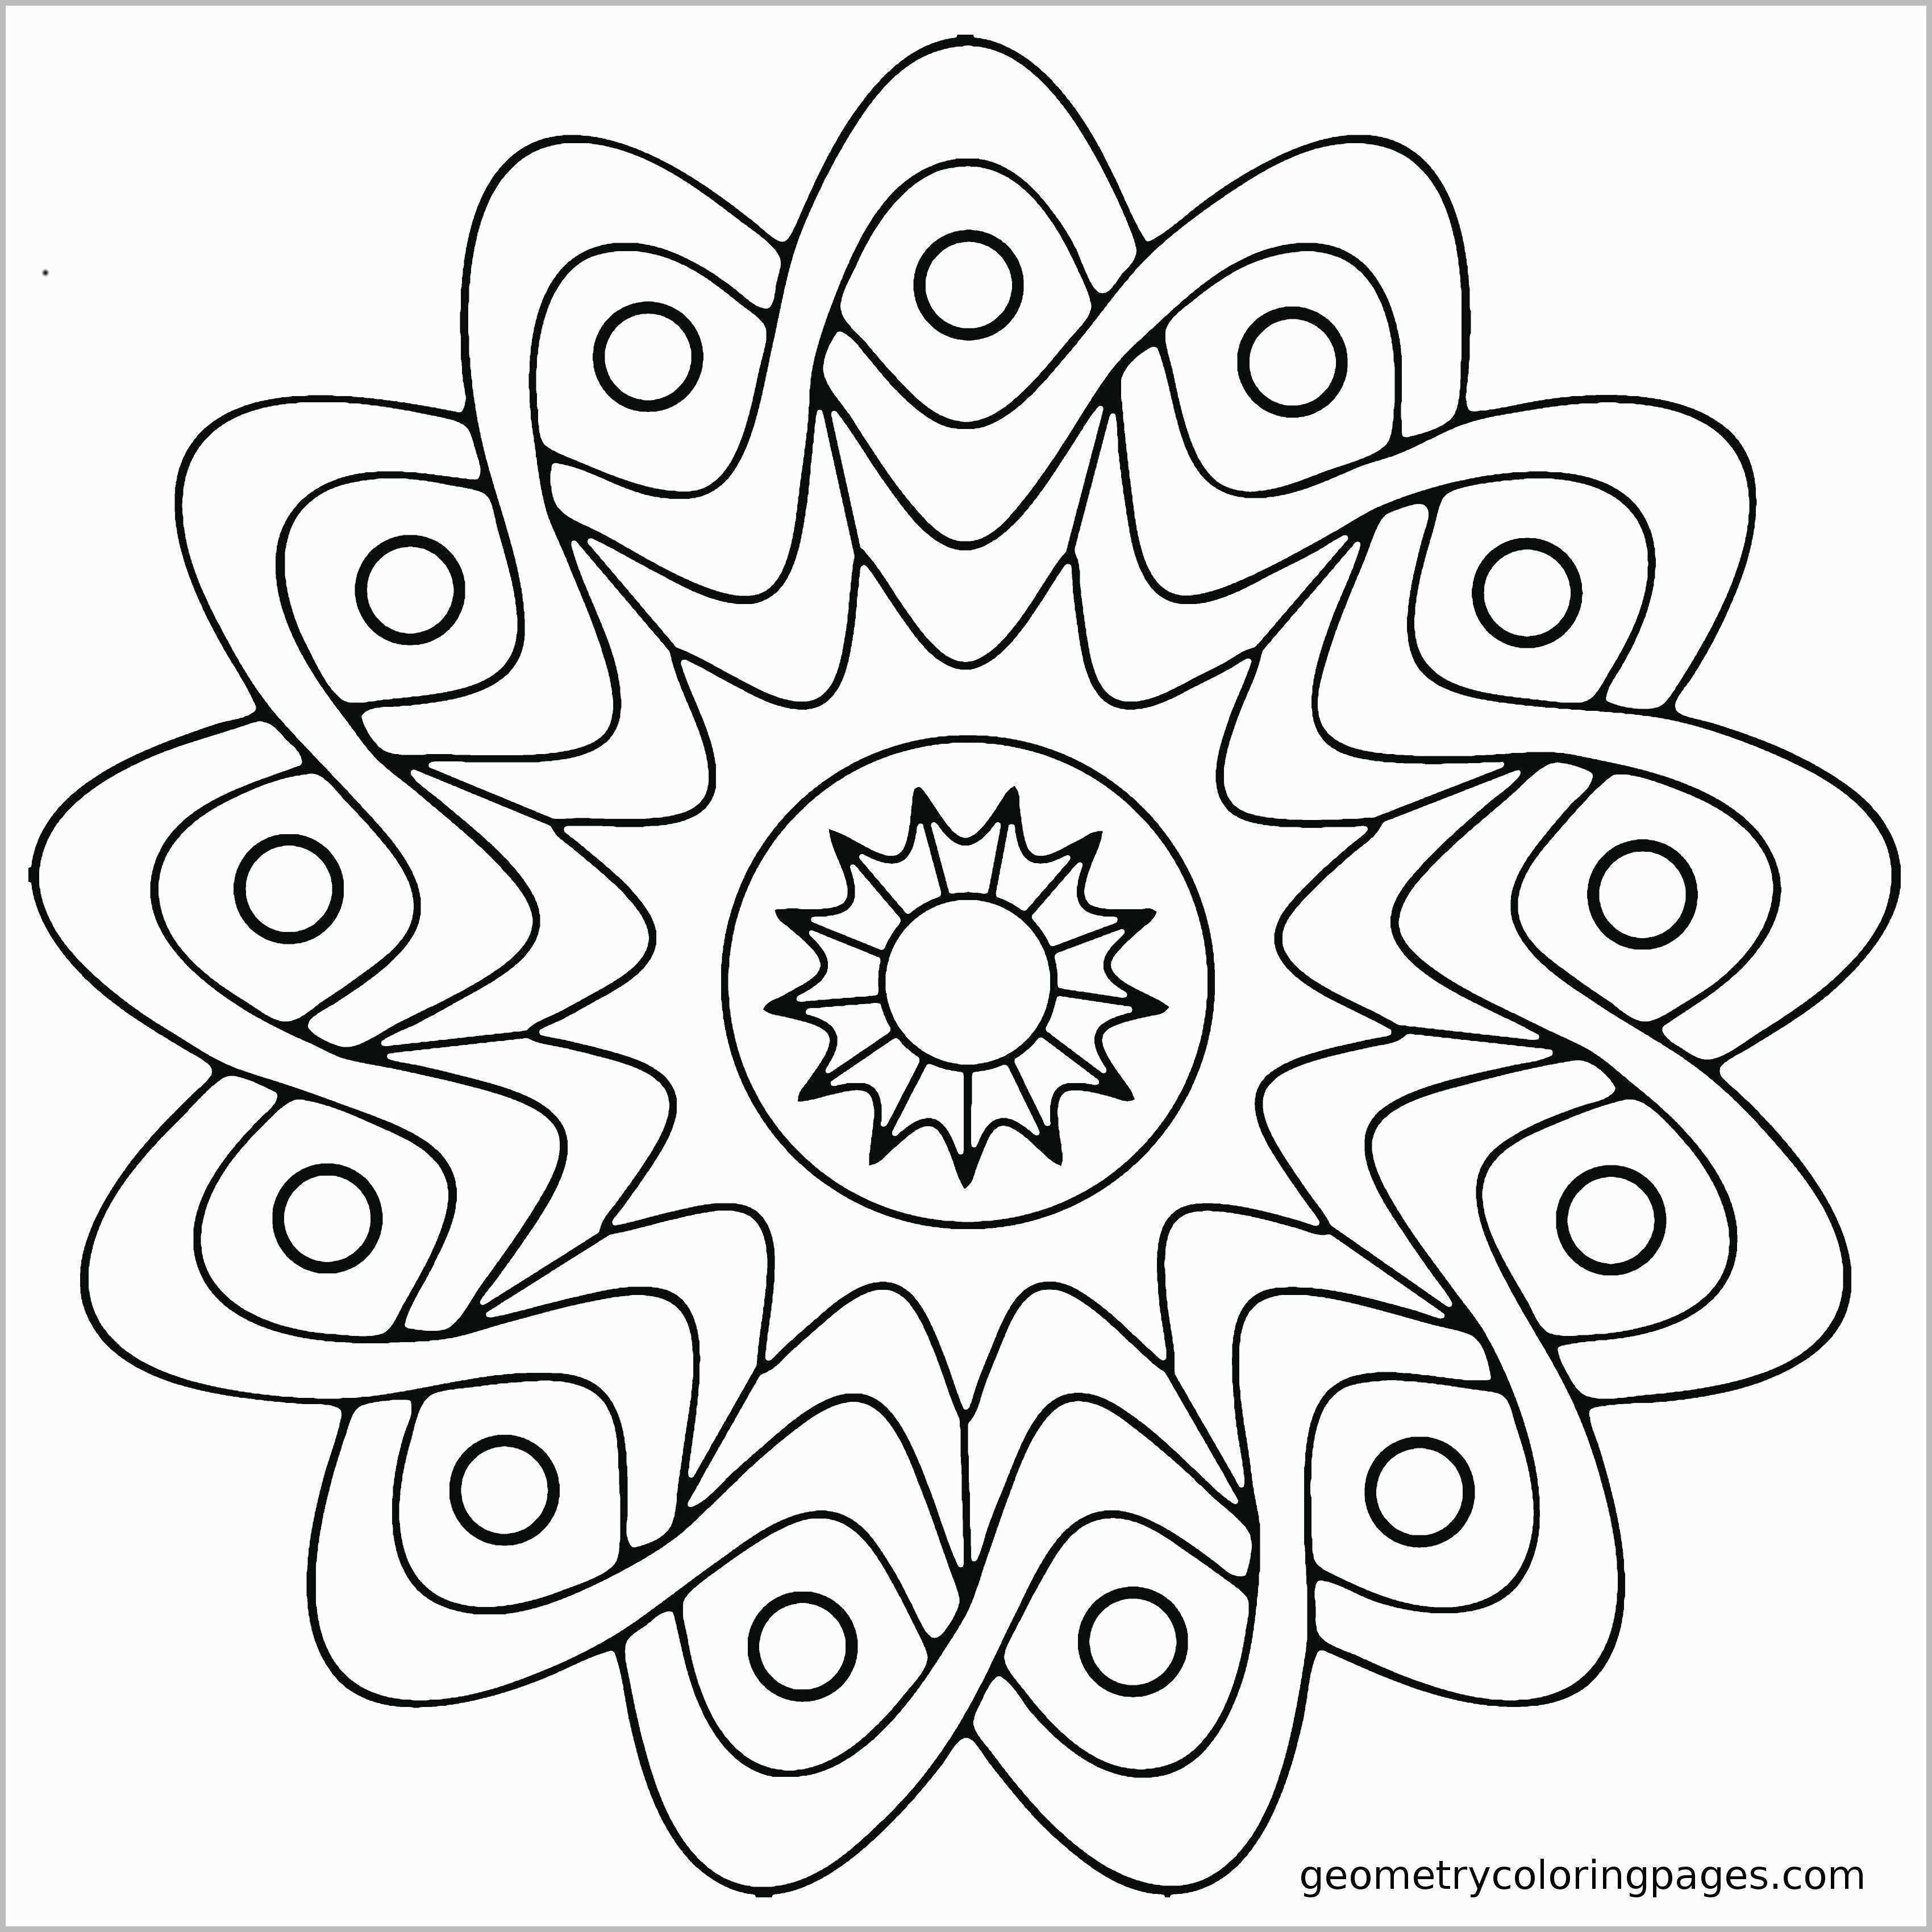 Mandala Drawing For Kids at PaintingValley.com | Explore collection of